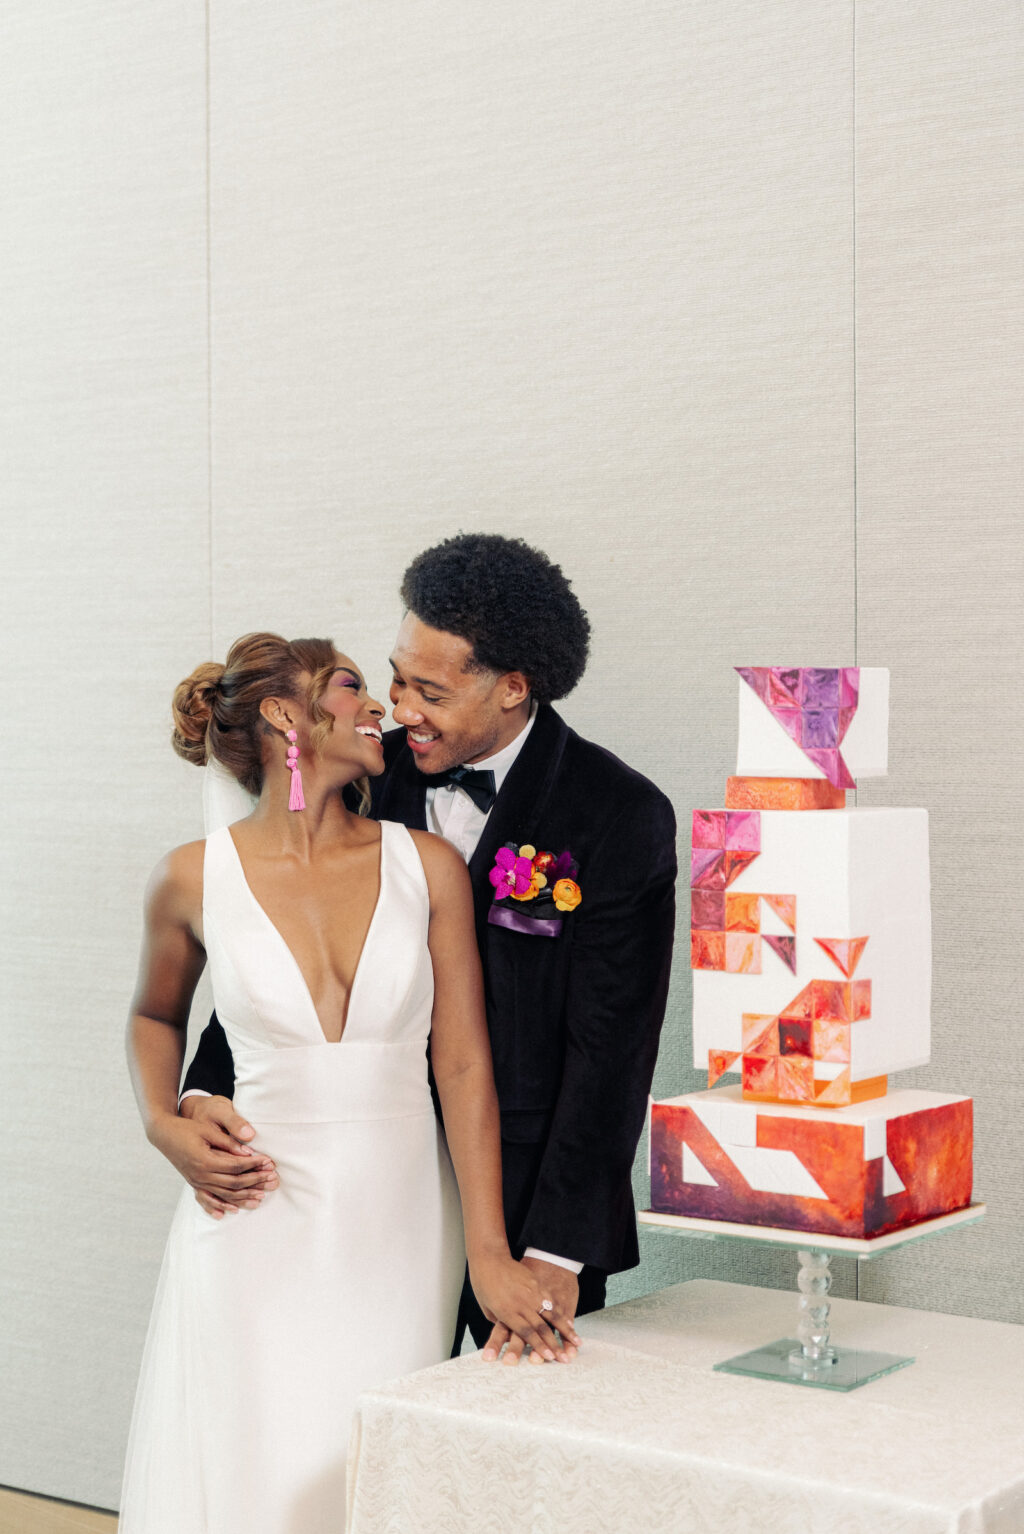 Modern Bride and Groom Standing with Unique Whimsical Geometric Three Tier Wedding Cake, Red, Purple, and Orange Swirled Painted Shapes | Tampa Bay Wedding Photographer Dewitt for Love | Wedding Cake The Artistic Whisk